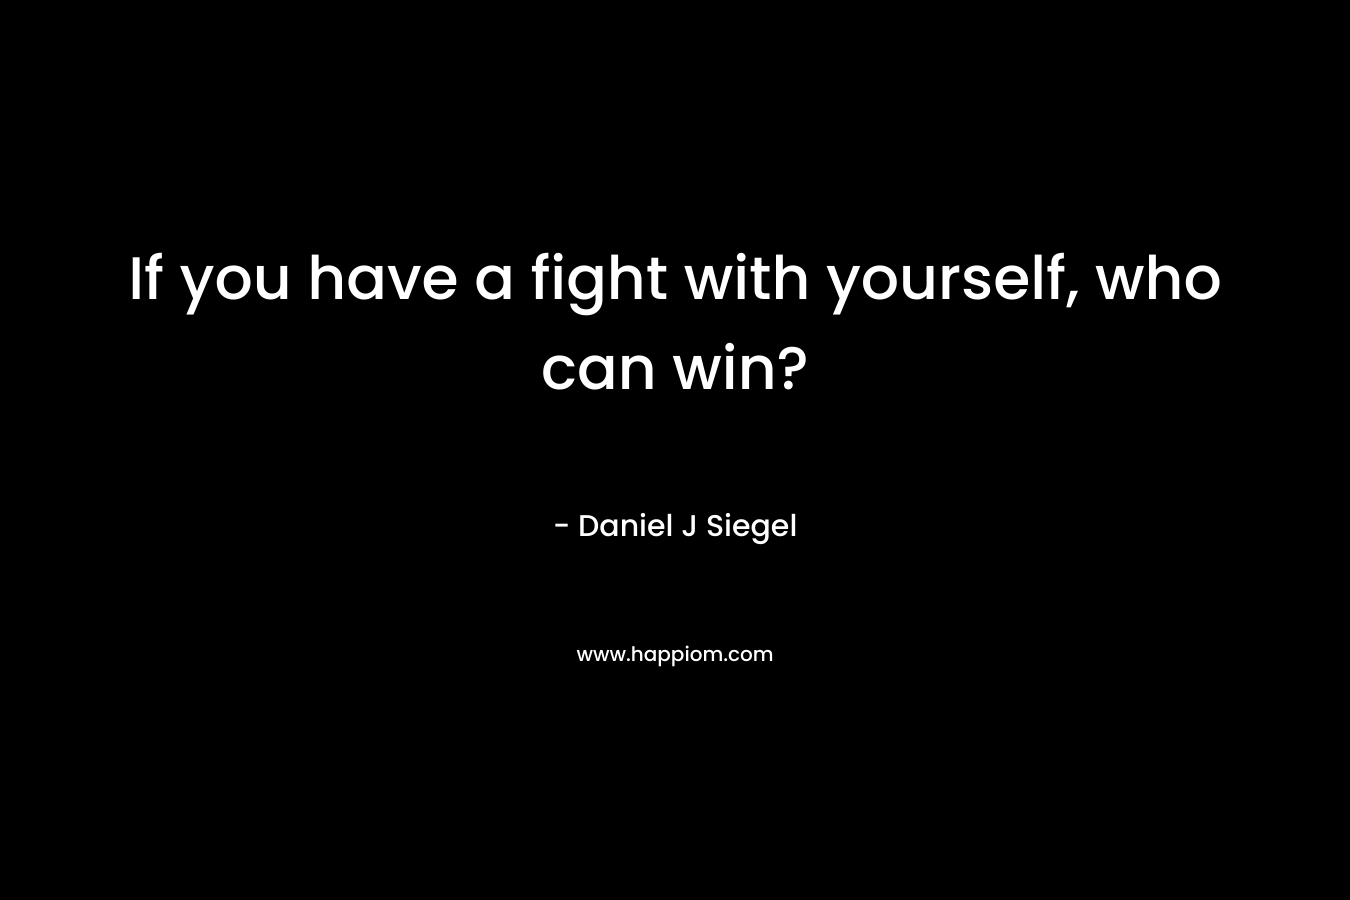 If you have a fight with yourself, who can win?